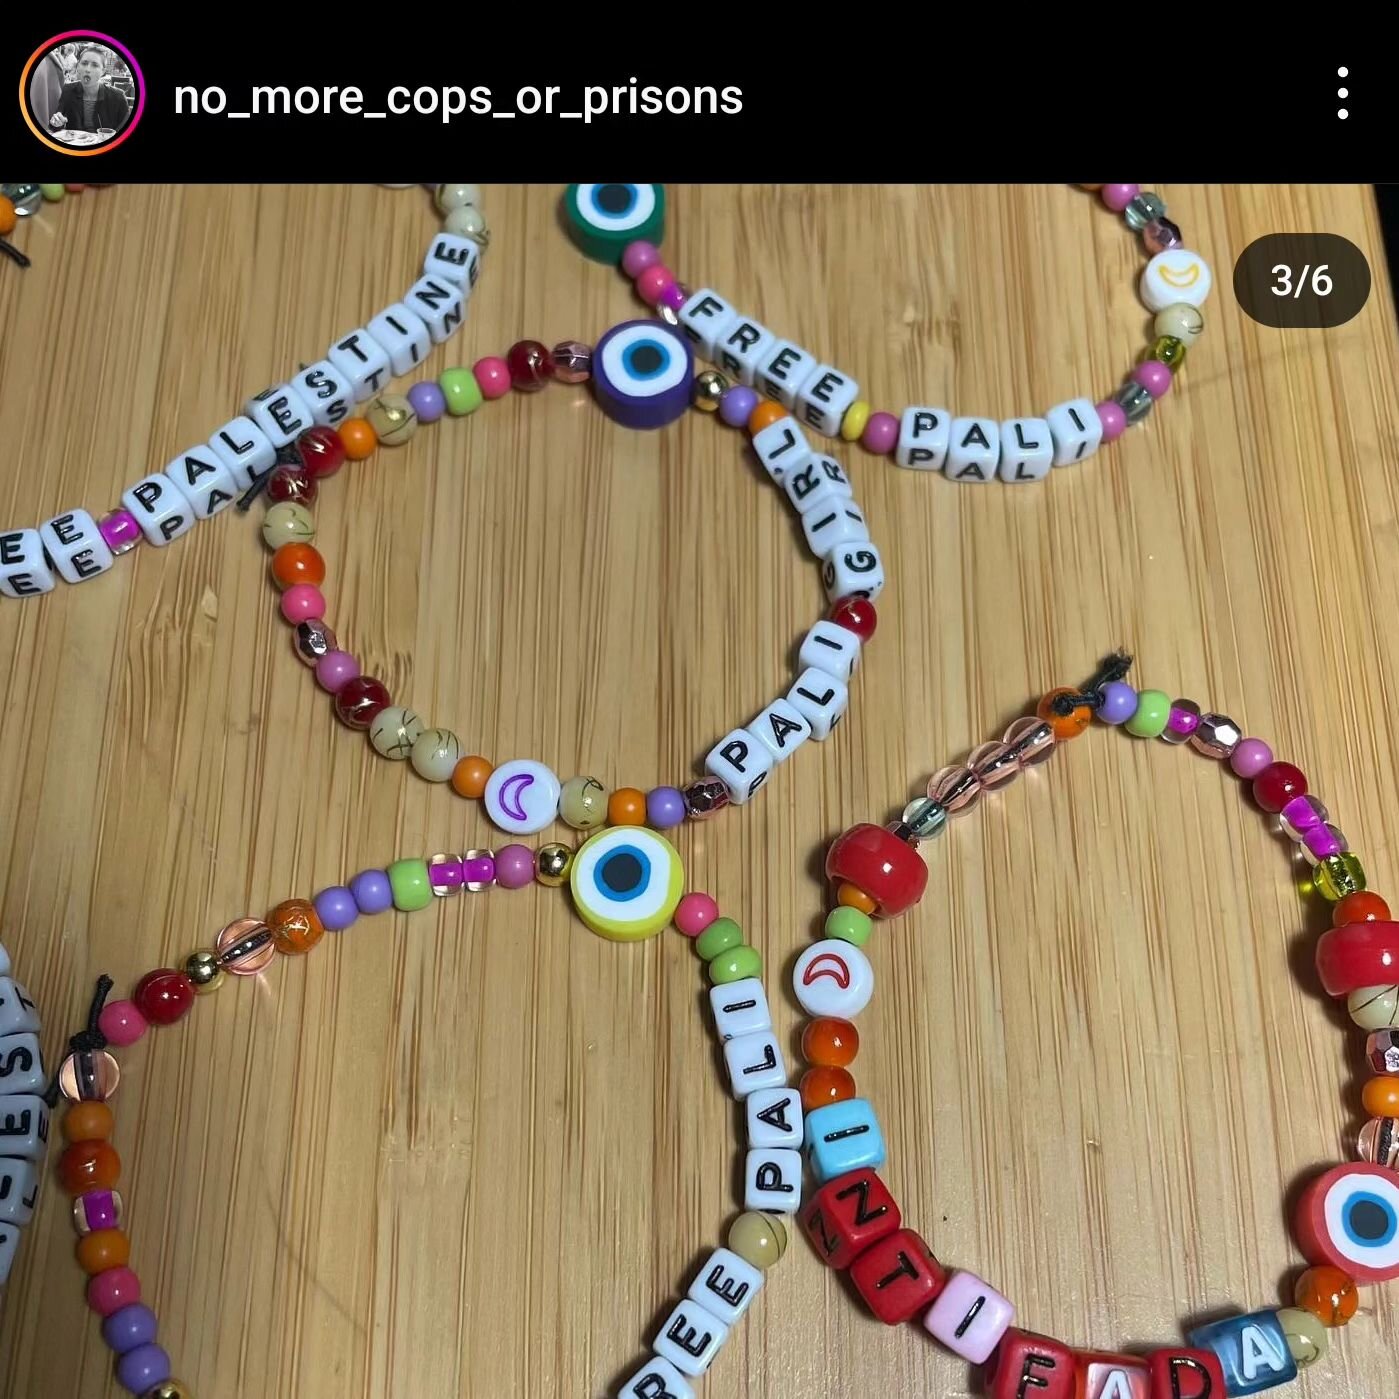 The wonderful @no_more_cops_or_prisons is doing a fundraiser for the GoFundMe campaigns of families trying to leave the horrific conditions in Gaza, caused by z10n1st genocid@l violence. 

If you want a bracelet, DM them! Bracelets are $5-$10, slidin